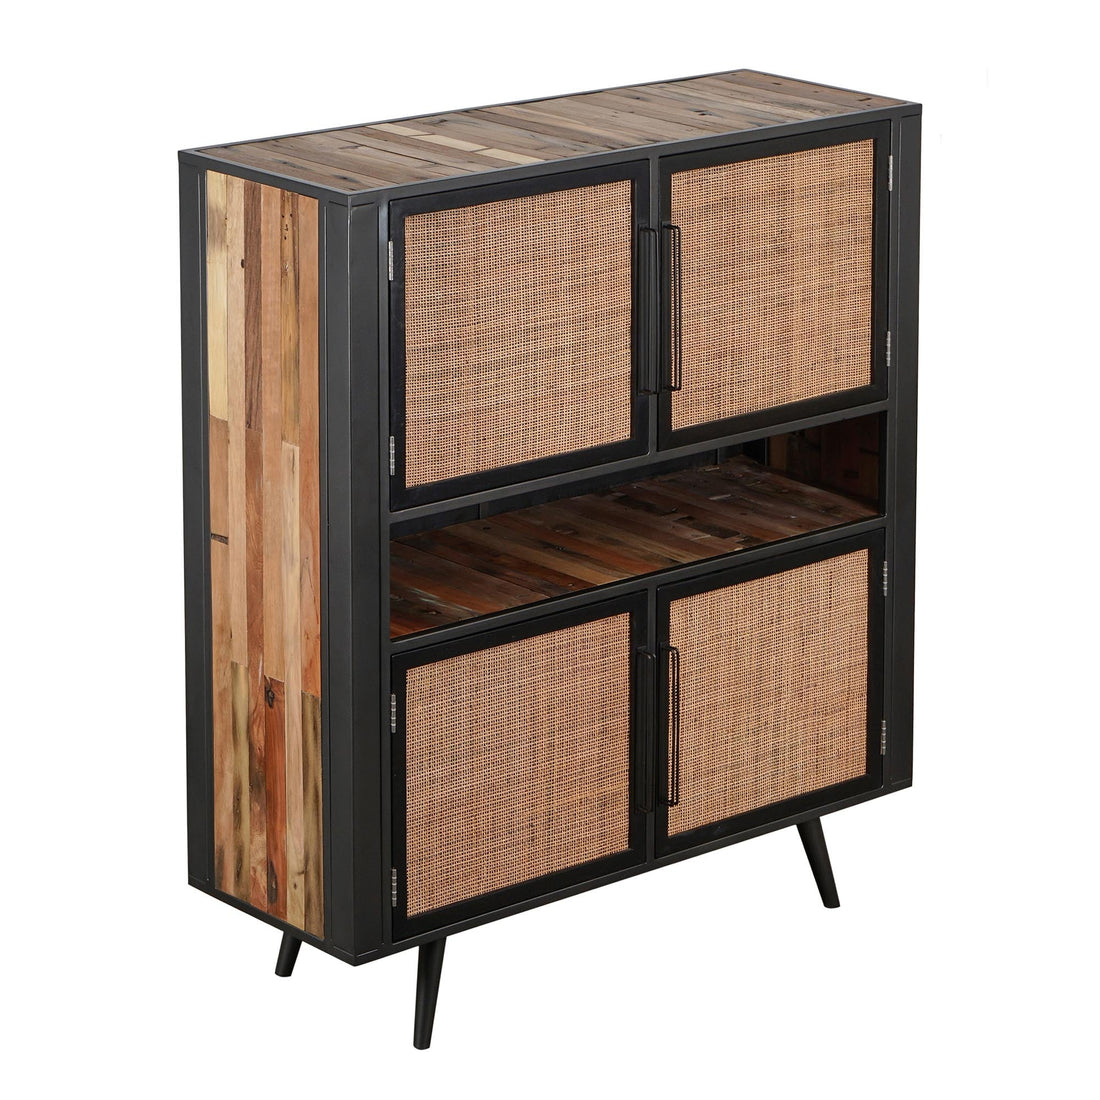 Nordic Rattan sideboard with 4 doors and 3 drawers